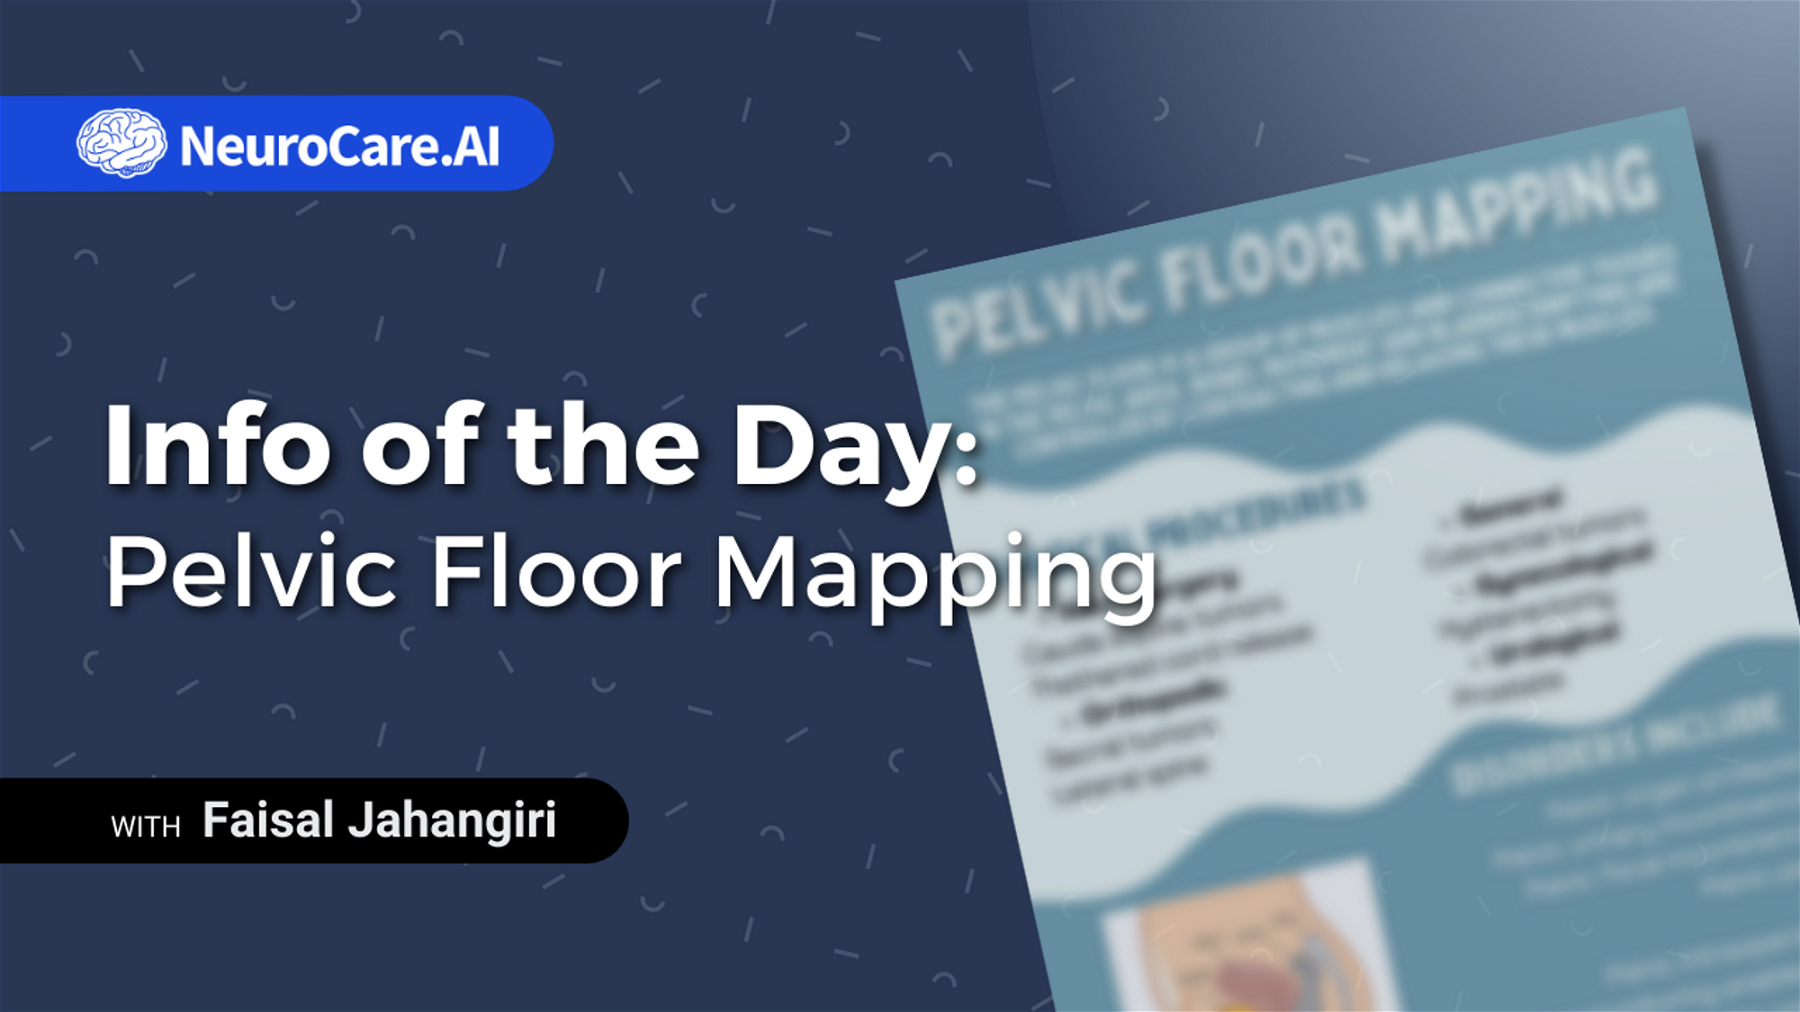 Info of the Day: "Pelvic Floor Mapping"